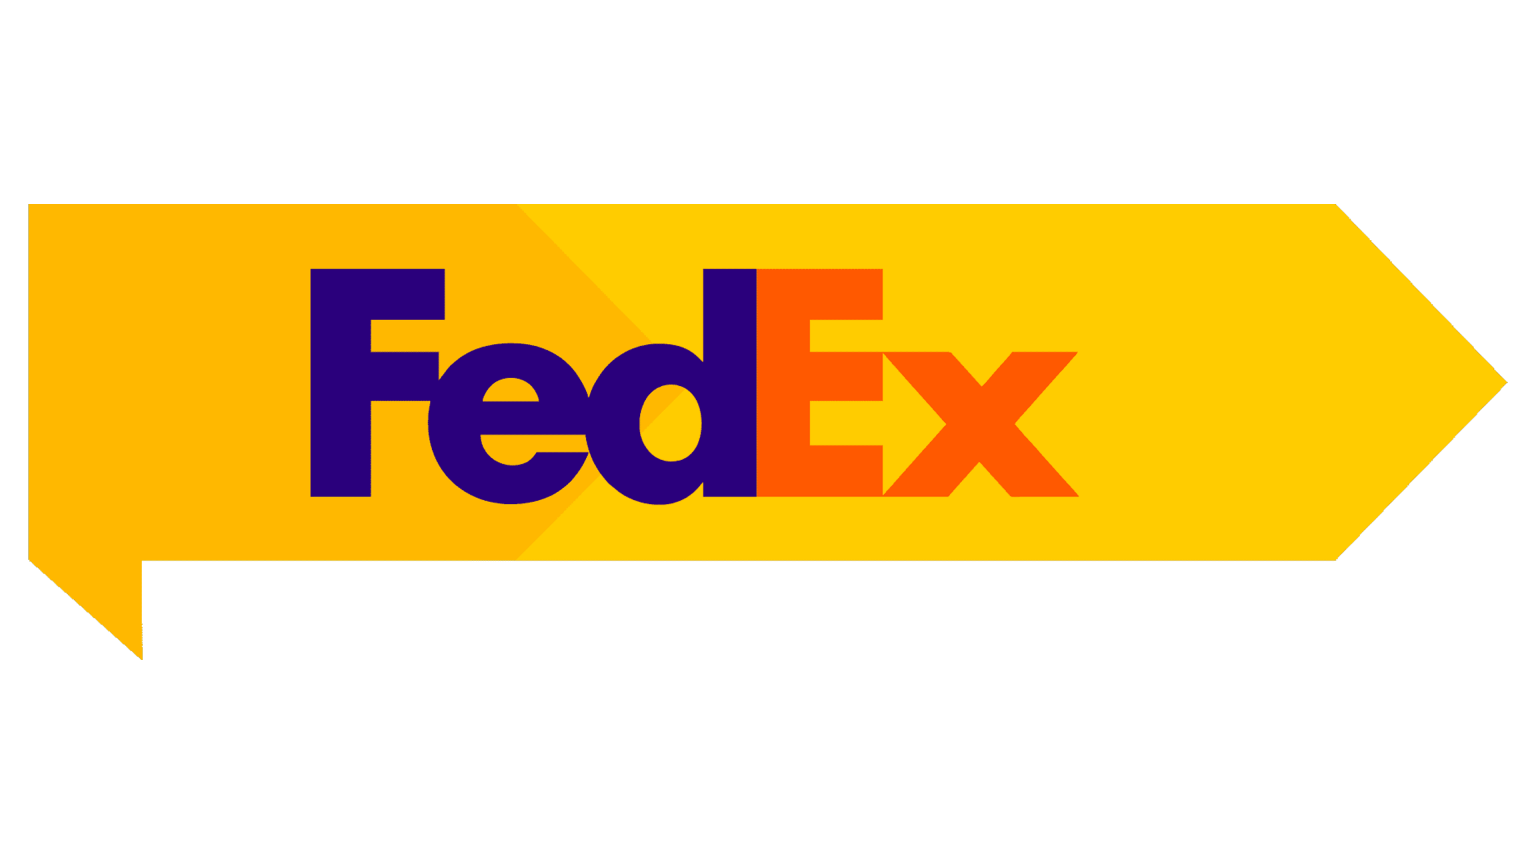 FedEx Logo and sign, new logo meaning and history, PNG, SVG